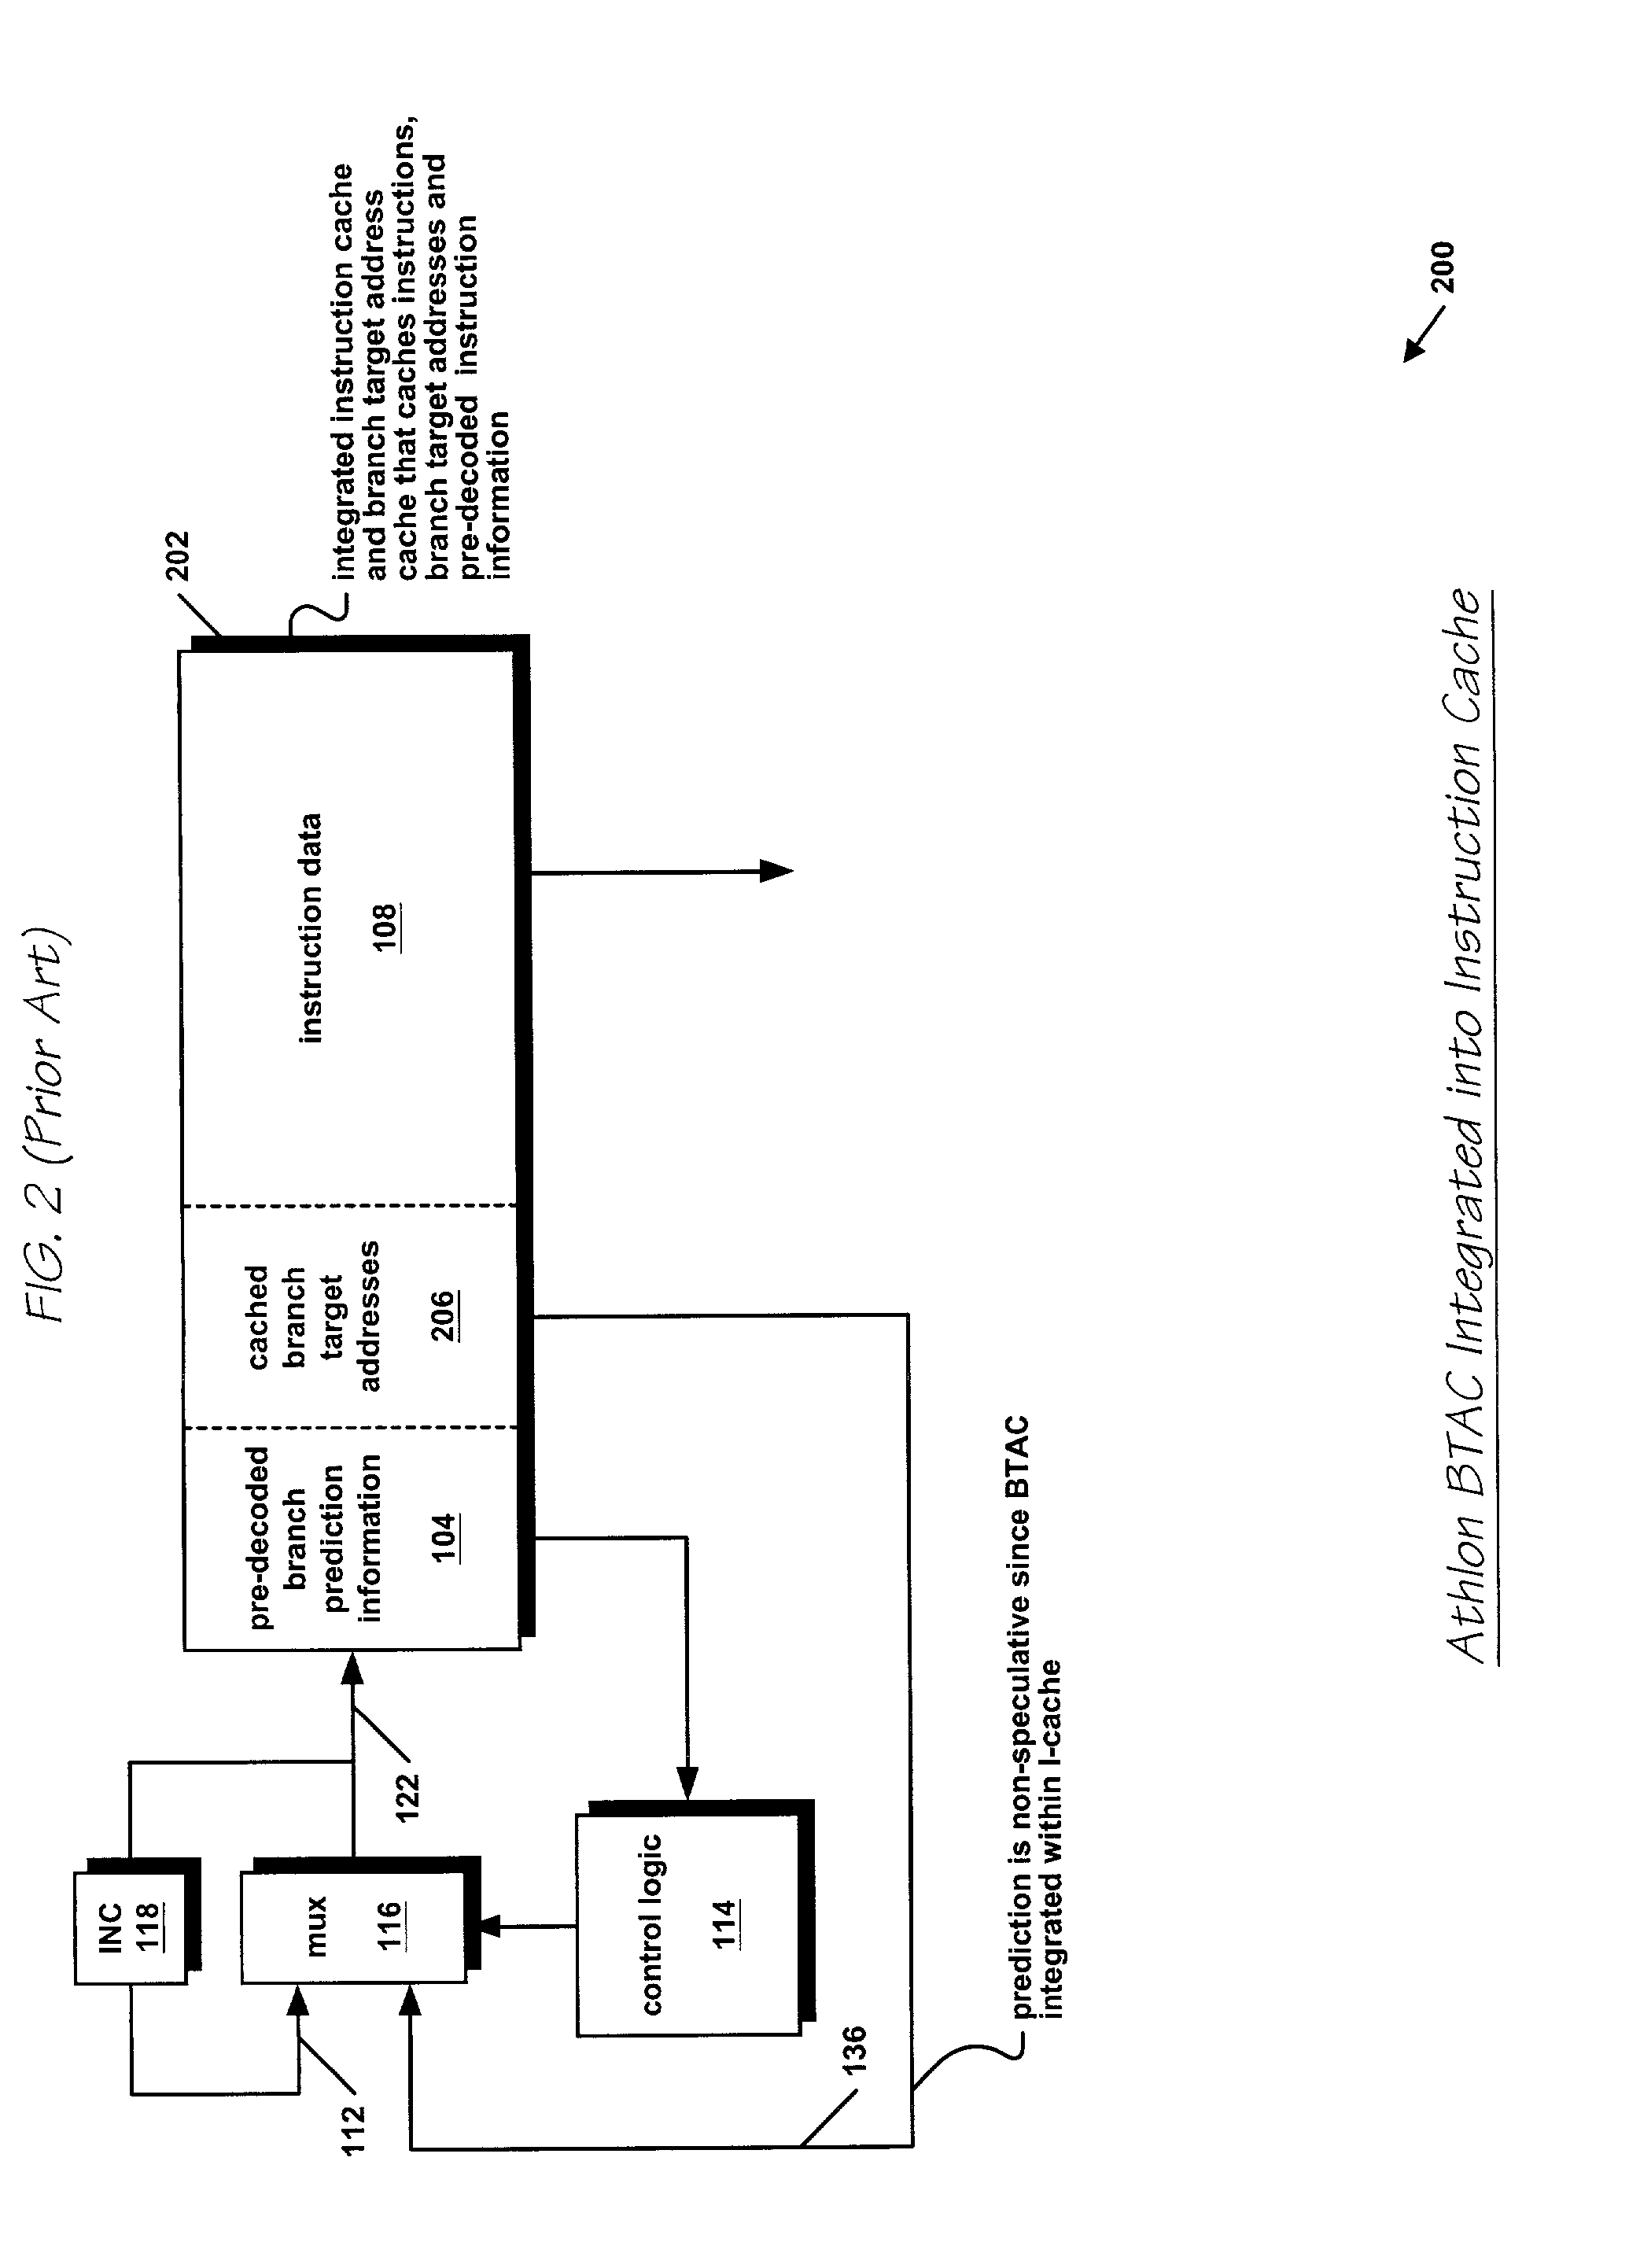 Speculative branch target address cache with selective override by secondary predictor based on branch instruction type